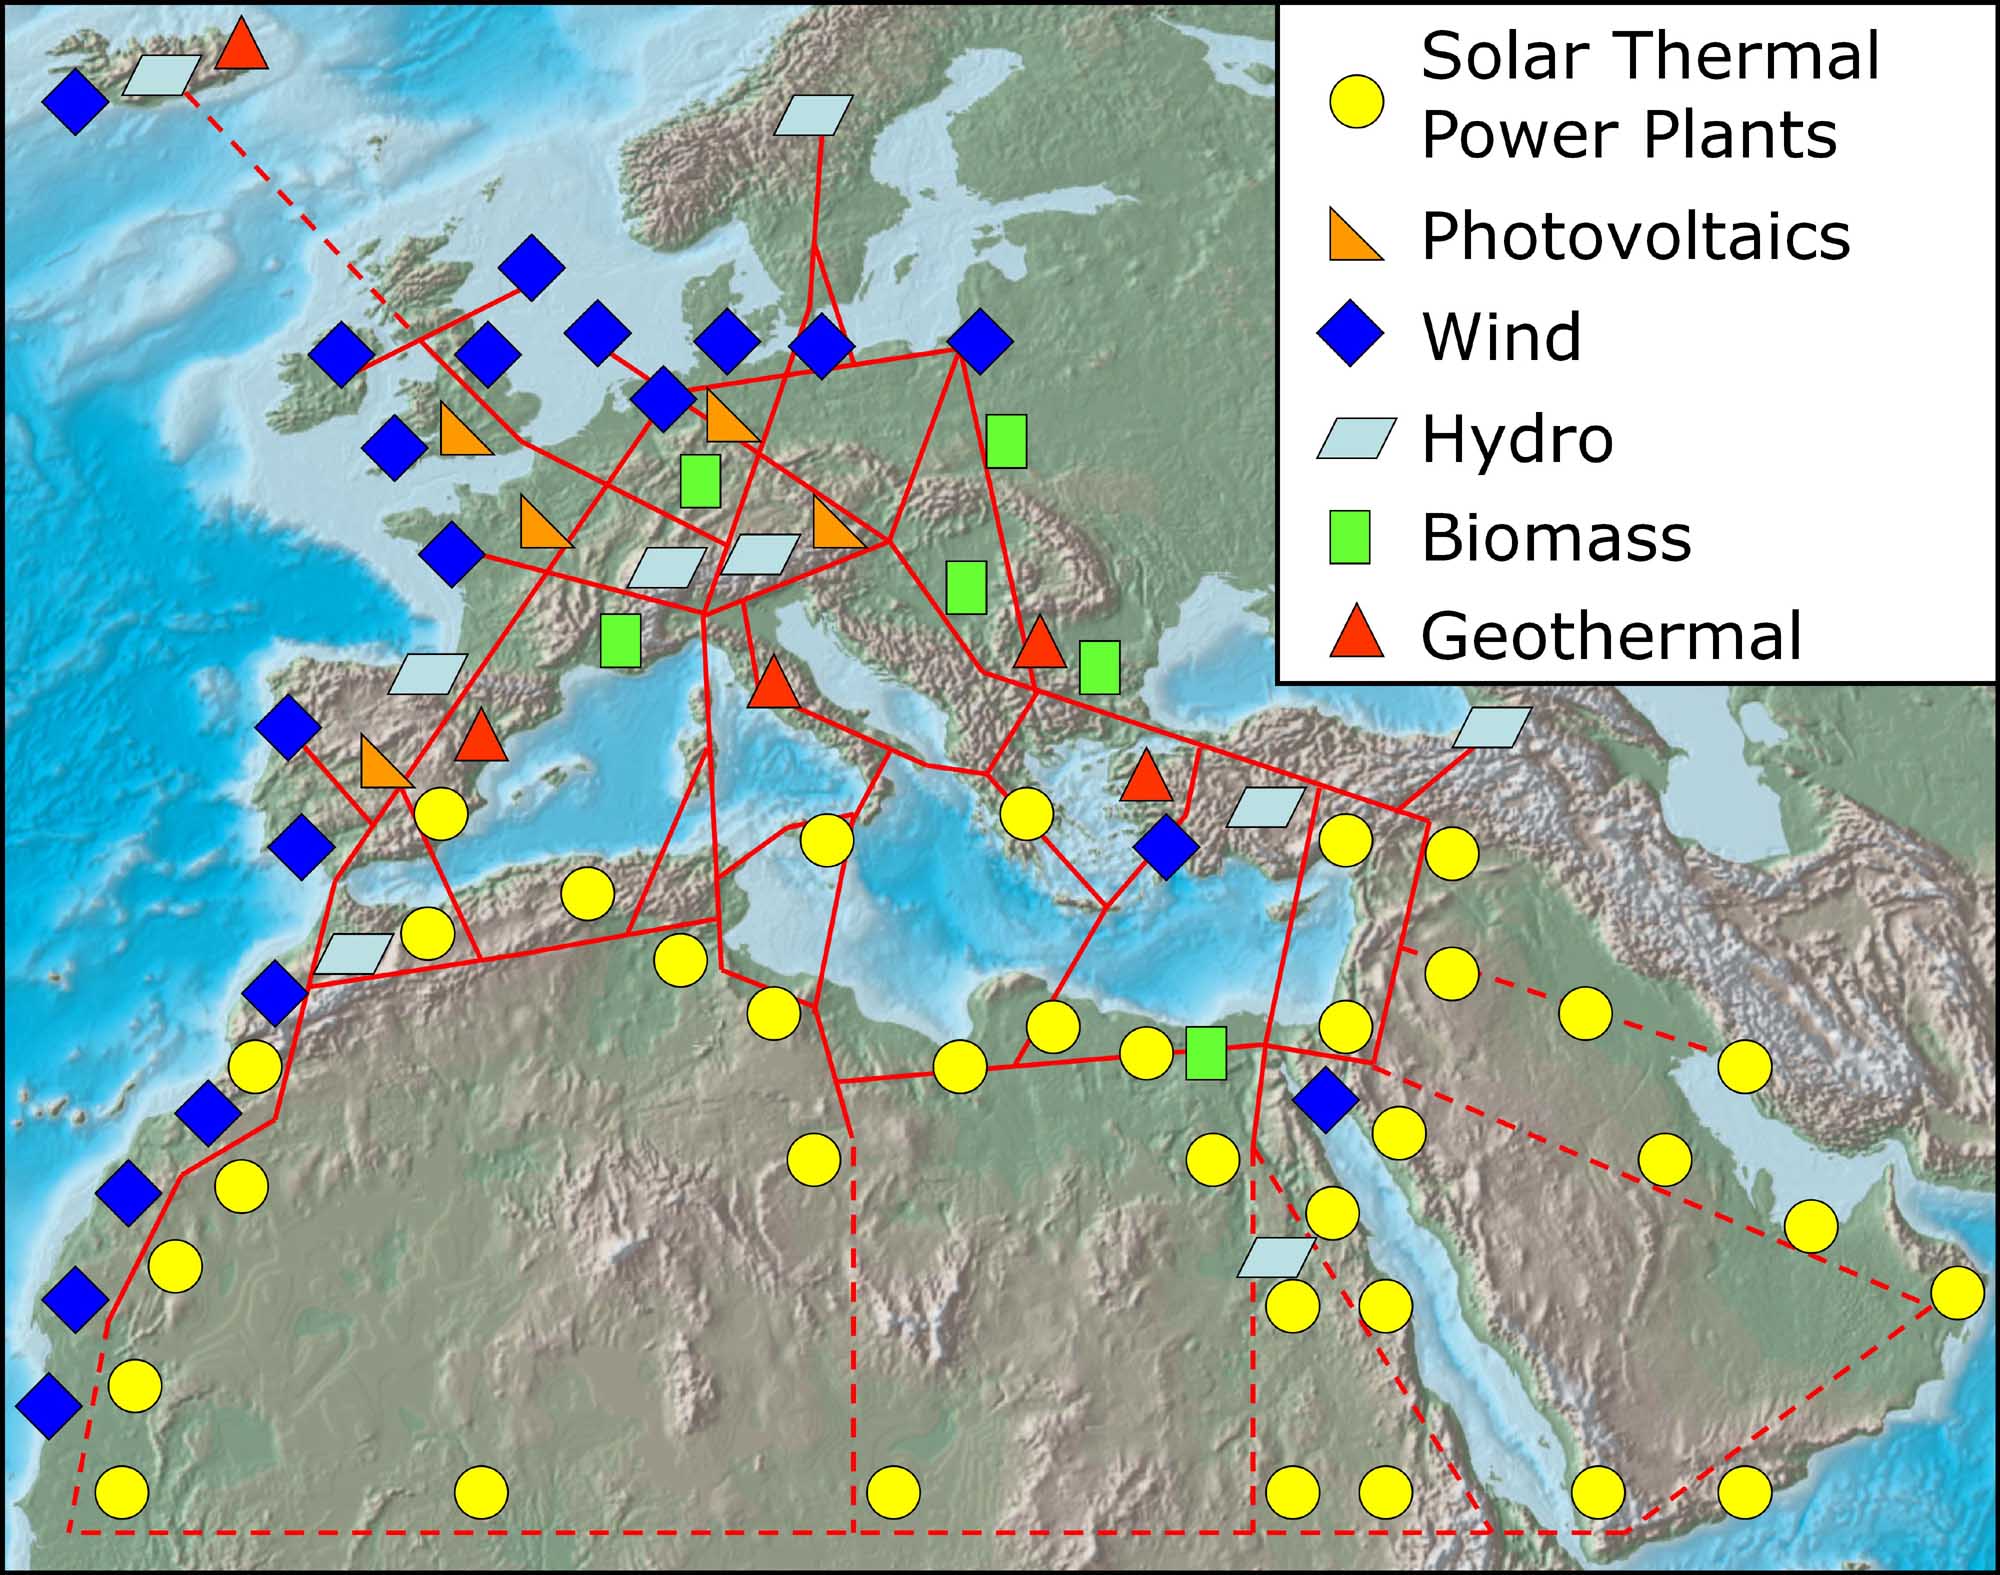 One conceptual plan of a super grid linking renewable sources across North Africa, the Middle East and Europe. (DESERTEC)